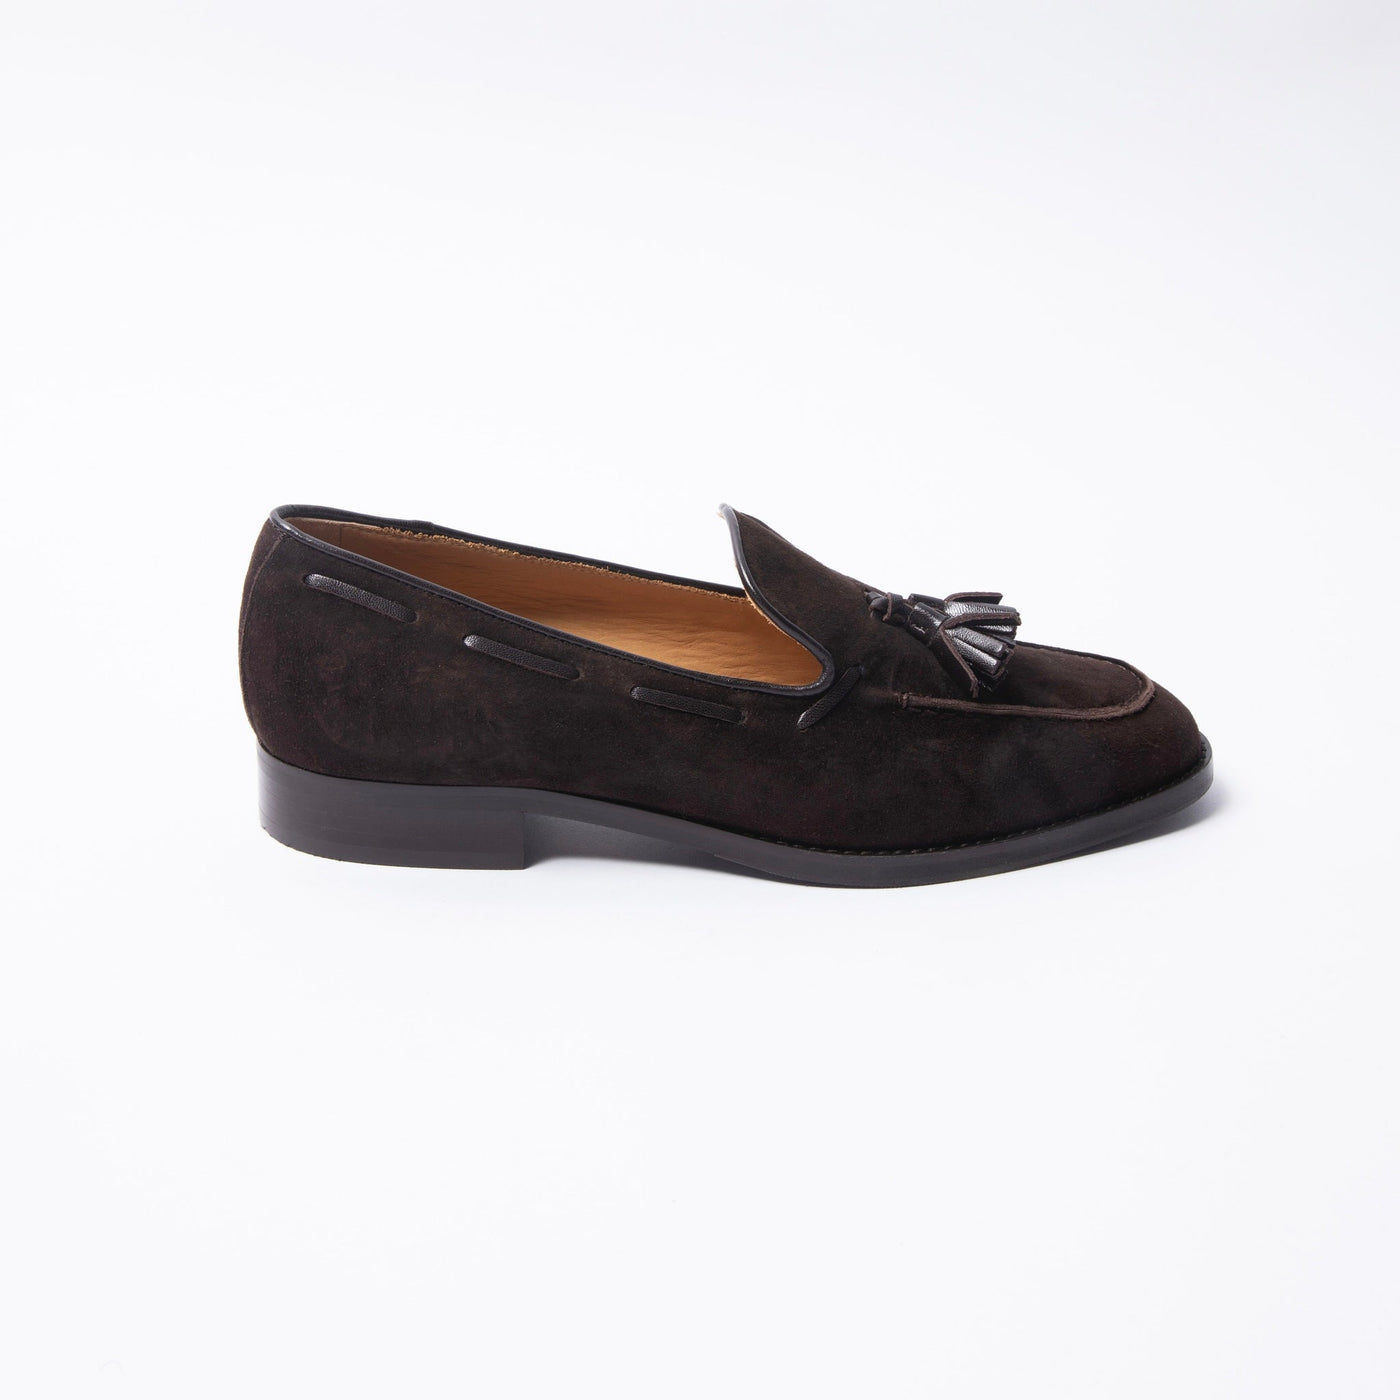 Women's brown suede leather loafers with tassels 